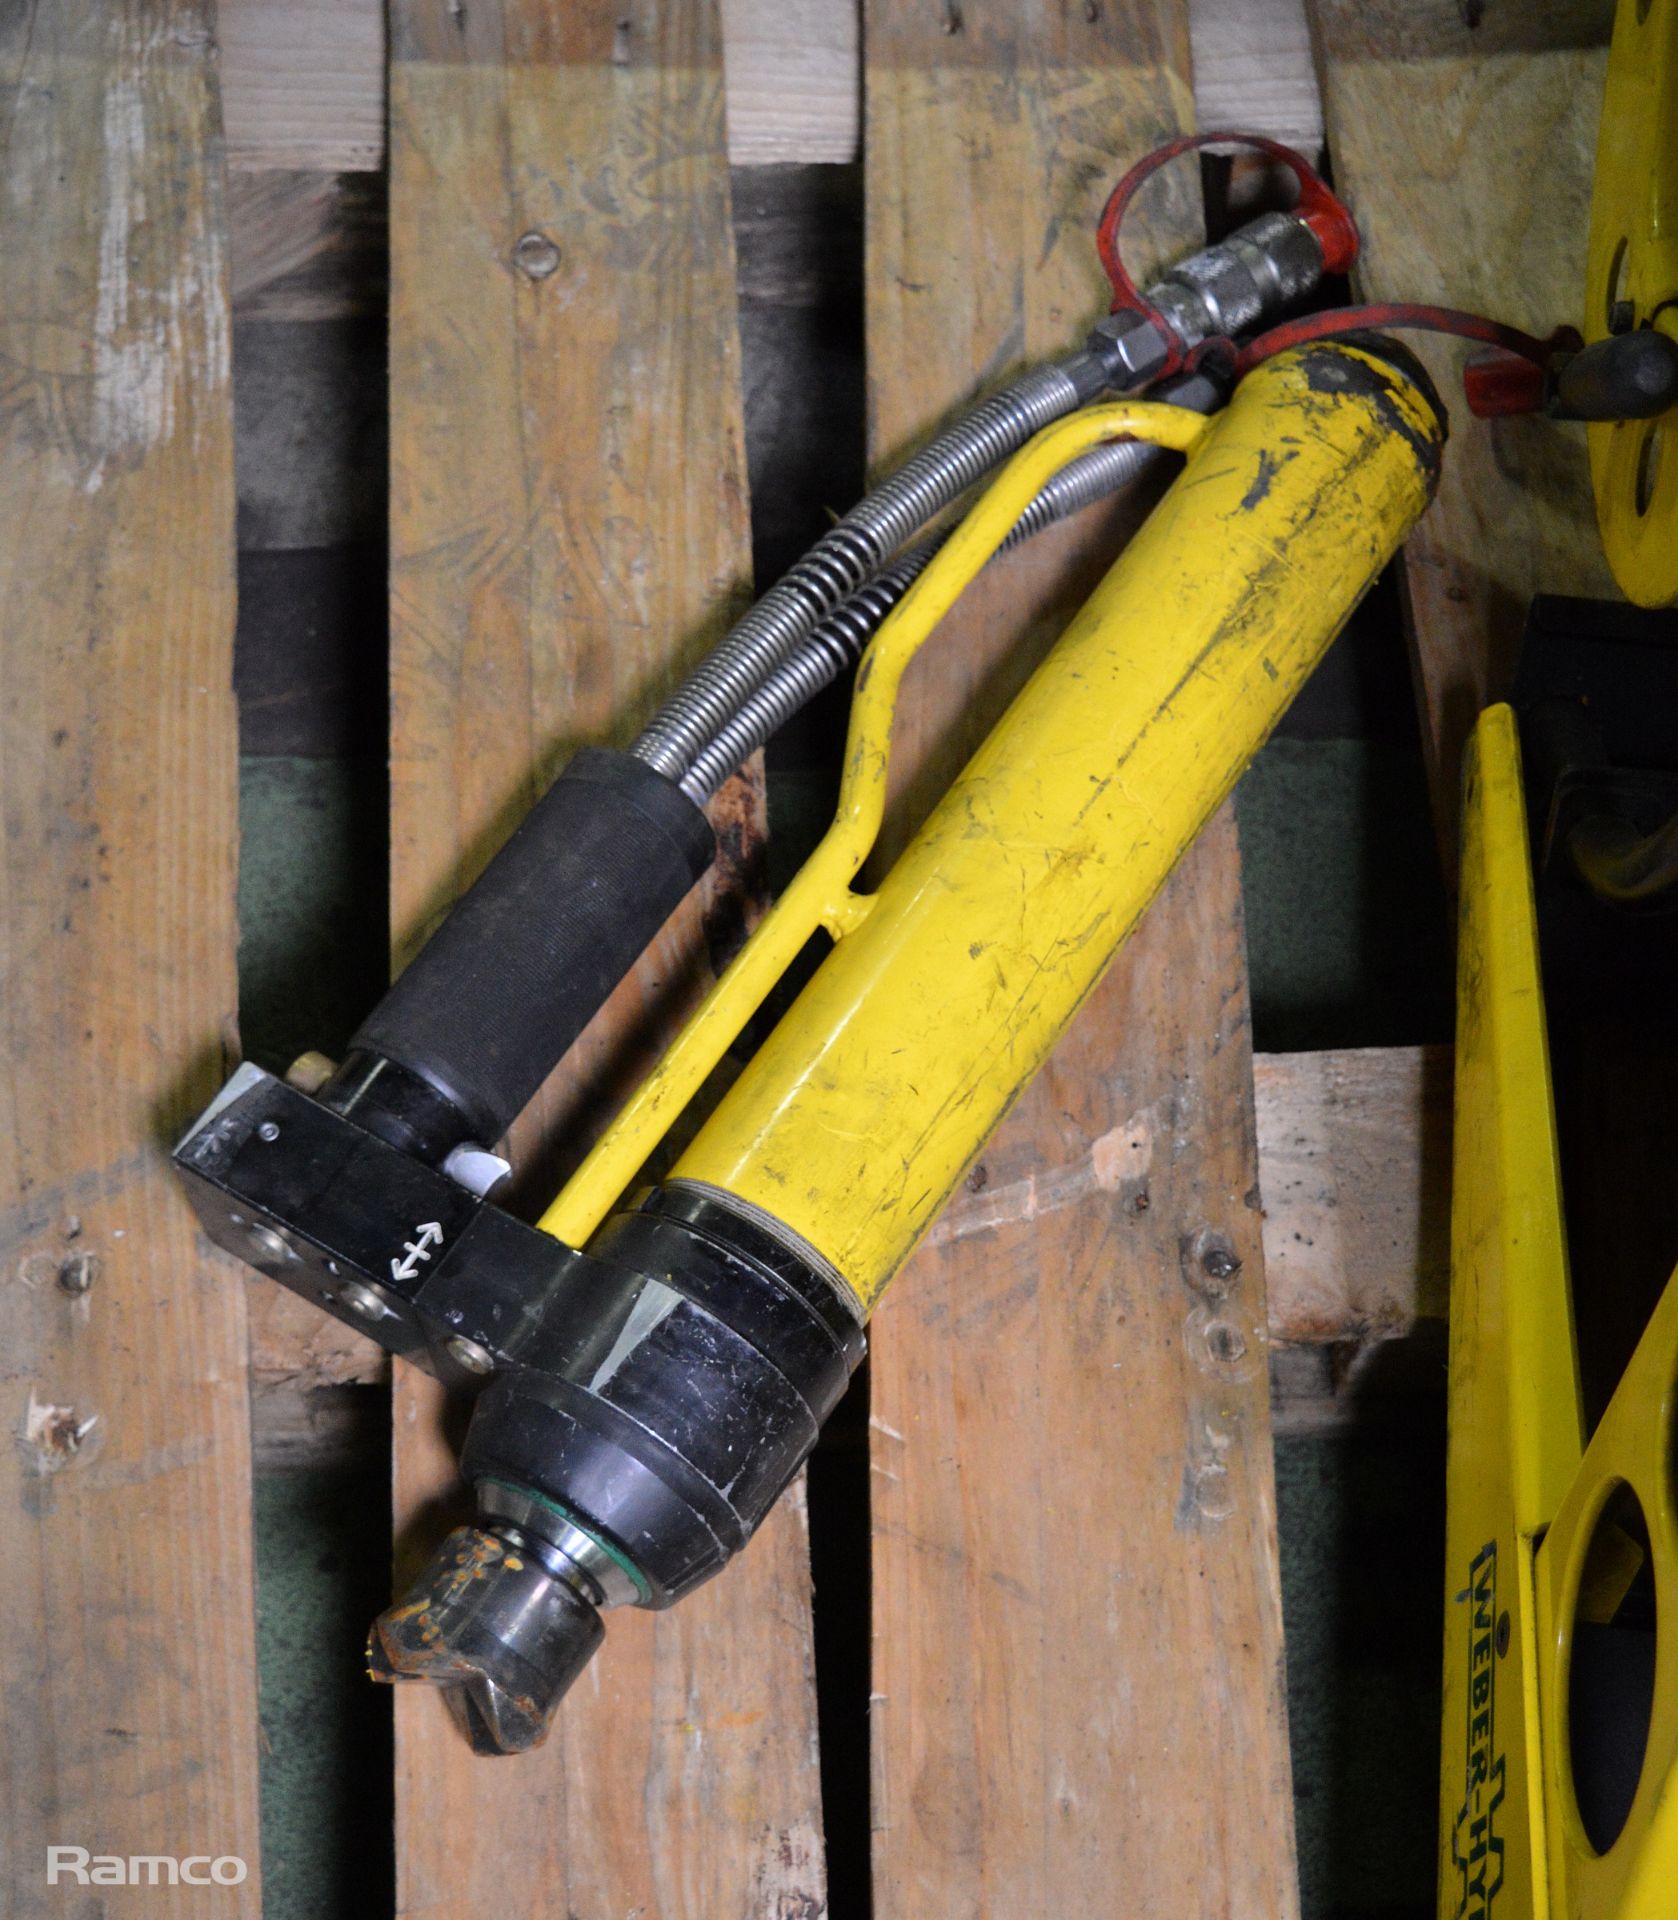 Weber Hydraulic Rescue Equipment & Accessories - Cutter, Spreader, Ram, Power pack & hoses - Image 9 of 9